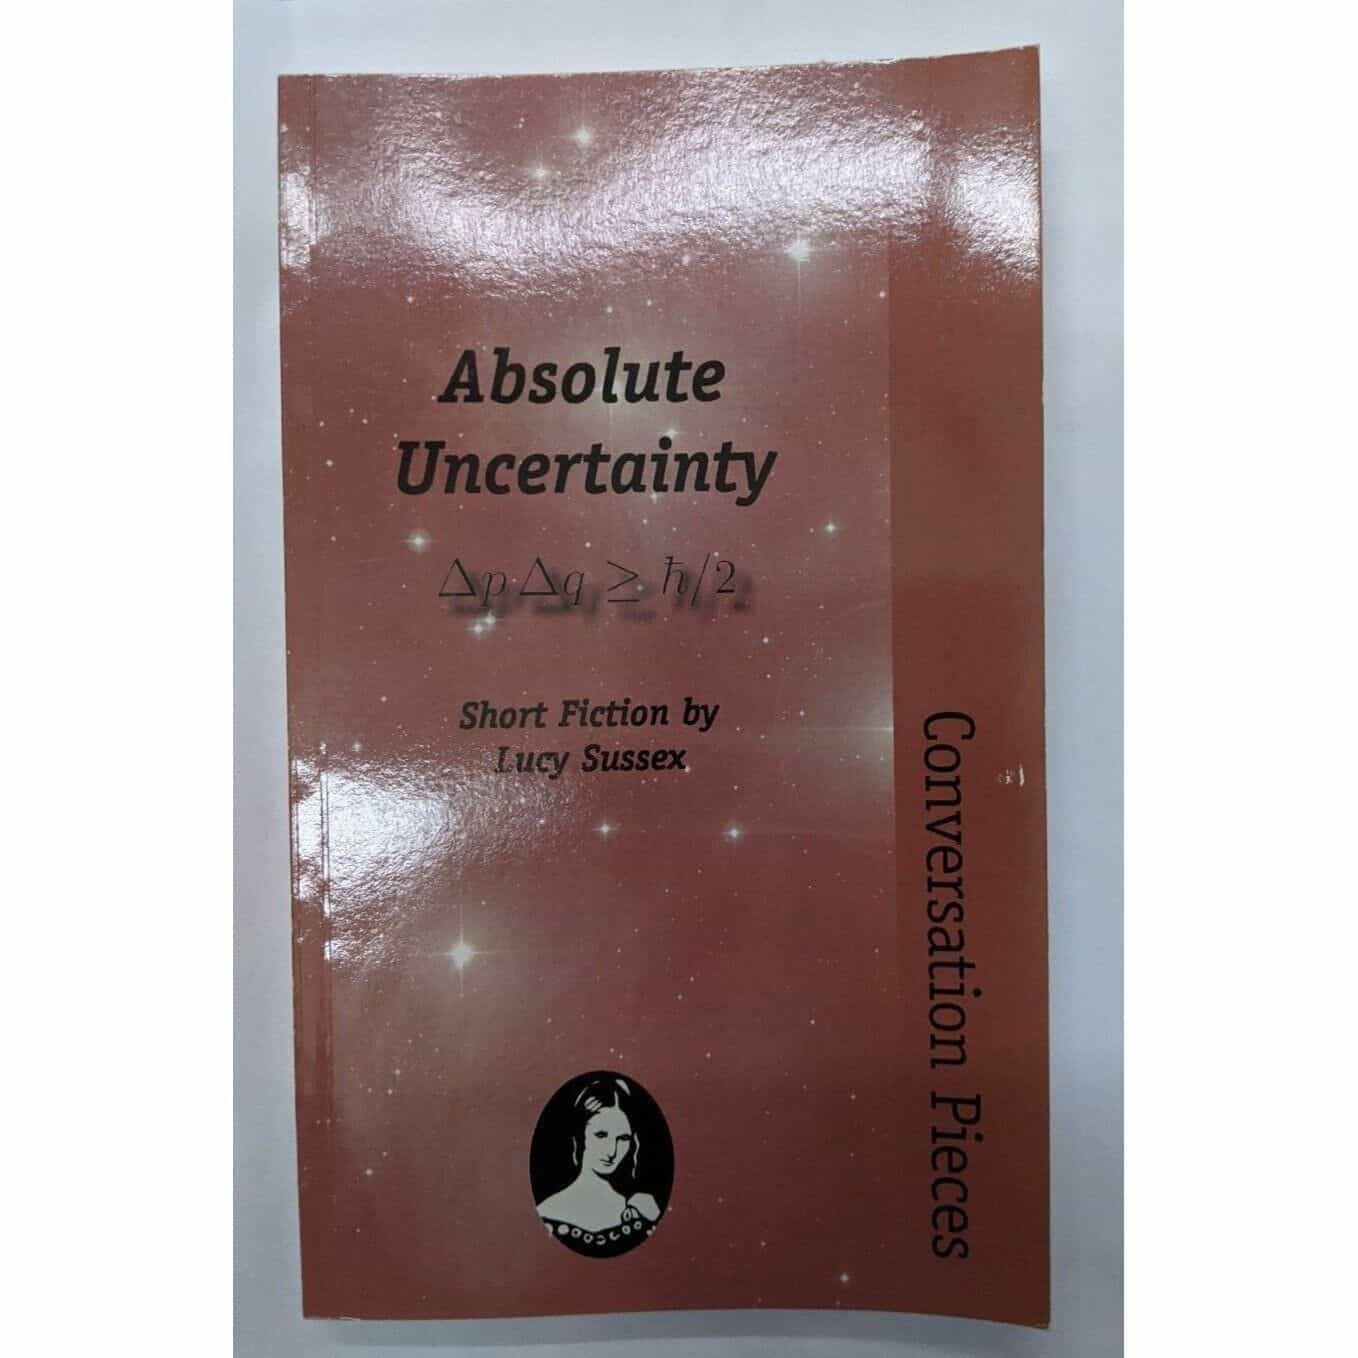 Absolute Uncertainty short fiction by Lucy Sussex Conversation Pieces Book